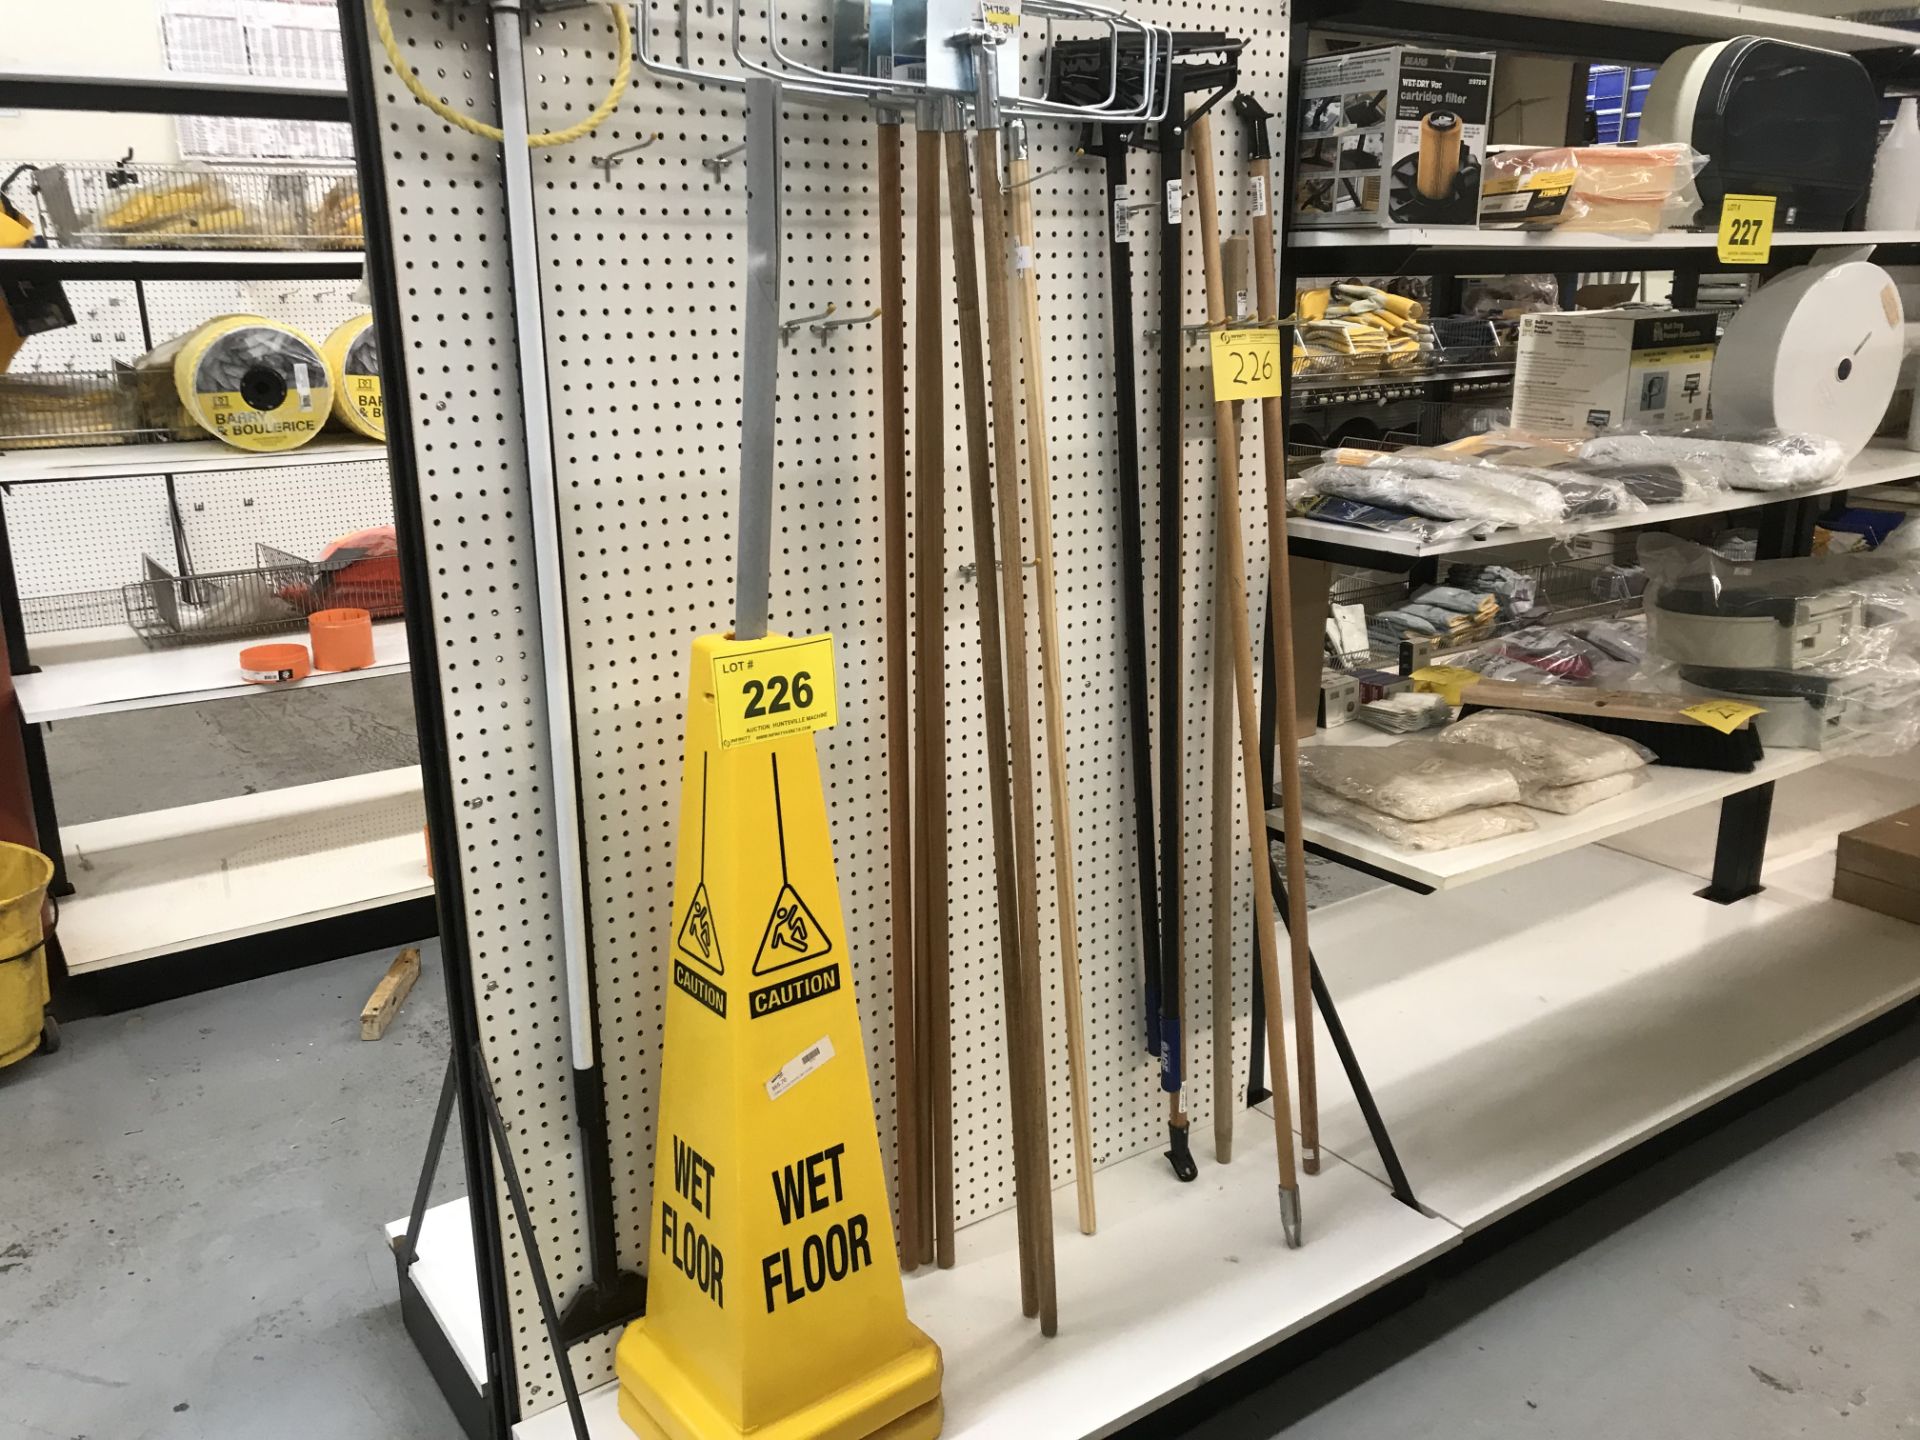 CONTENTS OF (1) SECTION OF DISPLAY RACK INCLUDING SAFETY CONES, MOP AND BROOM HANDLES (RACK NOT